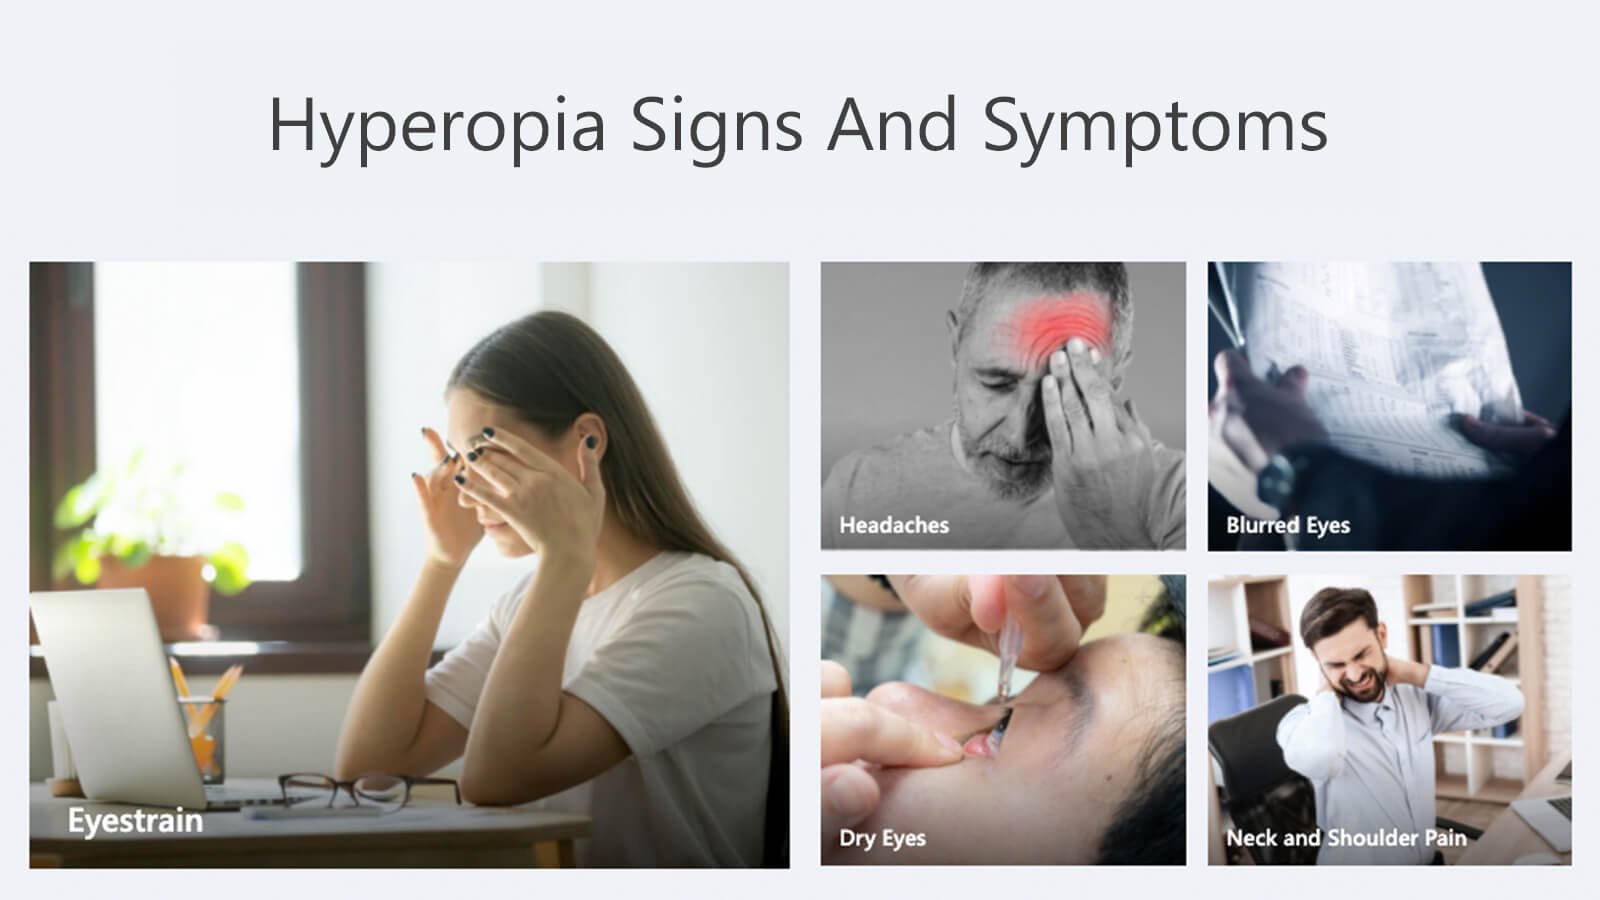 Hyperopia signs and symptoms